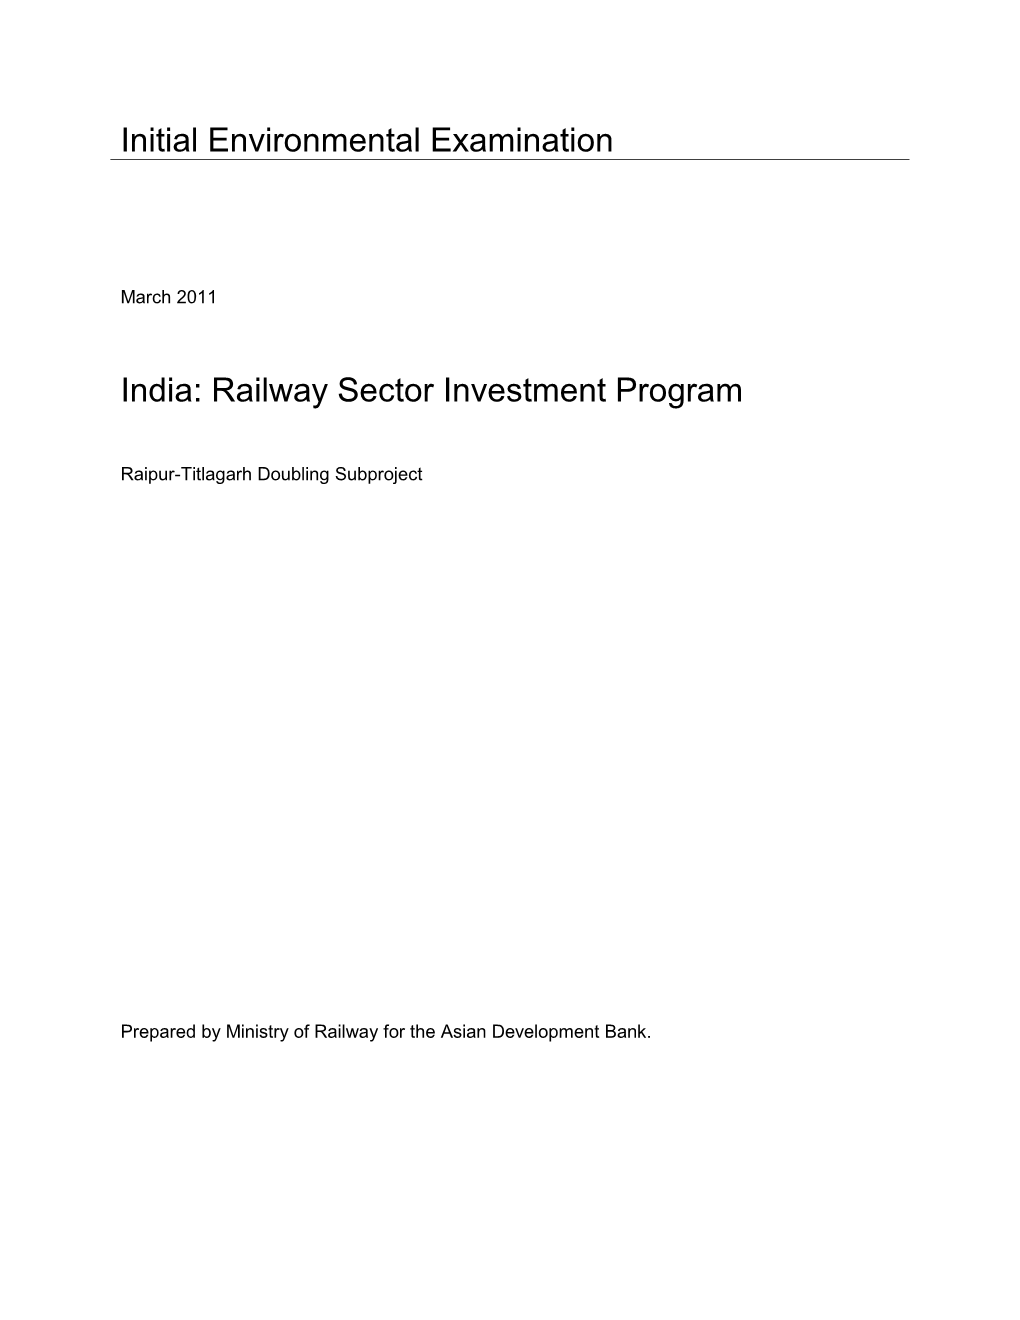 IEE: India: Raipur-Titlagarh Doubling Subproject, Railway Sector Investment Program